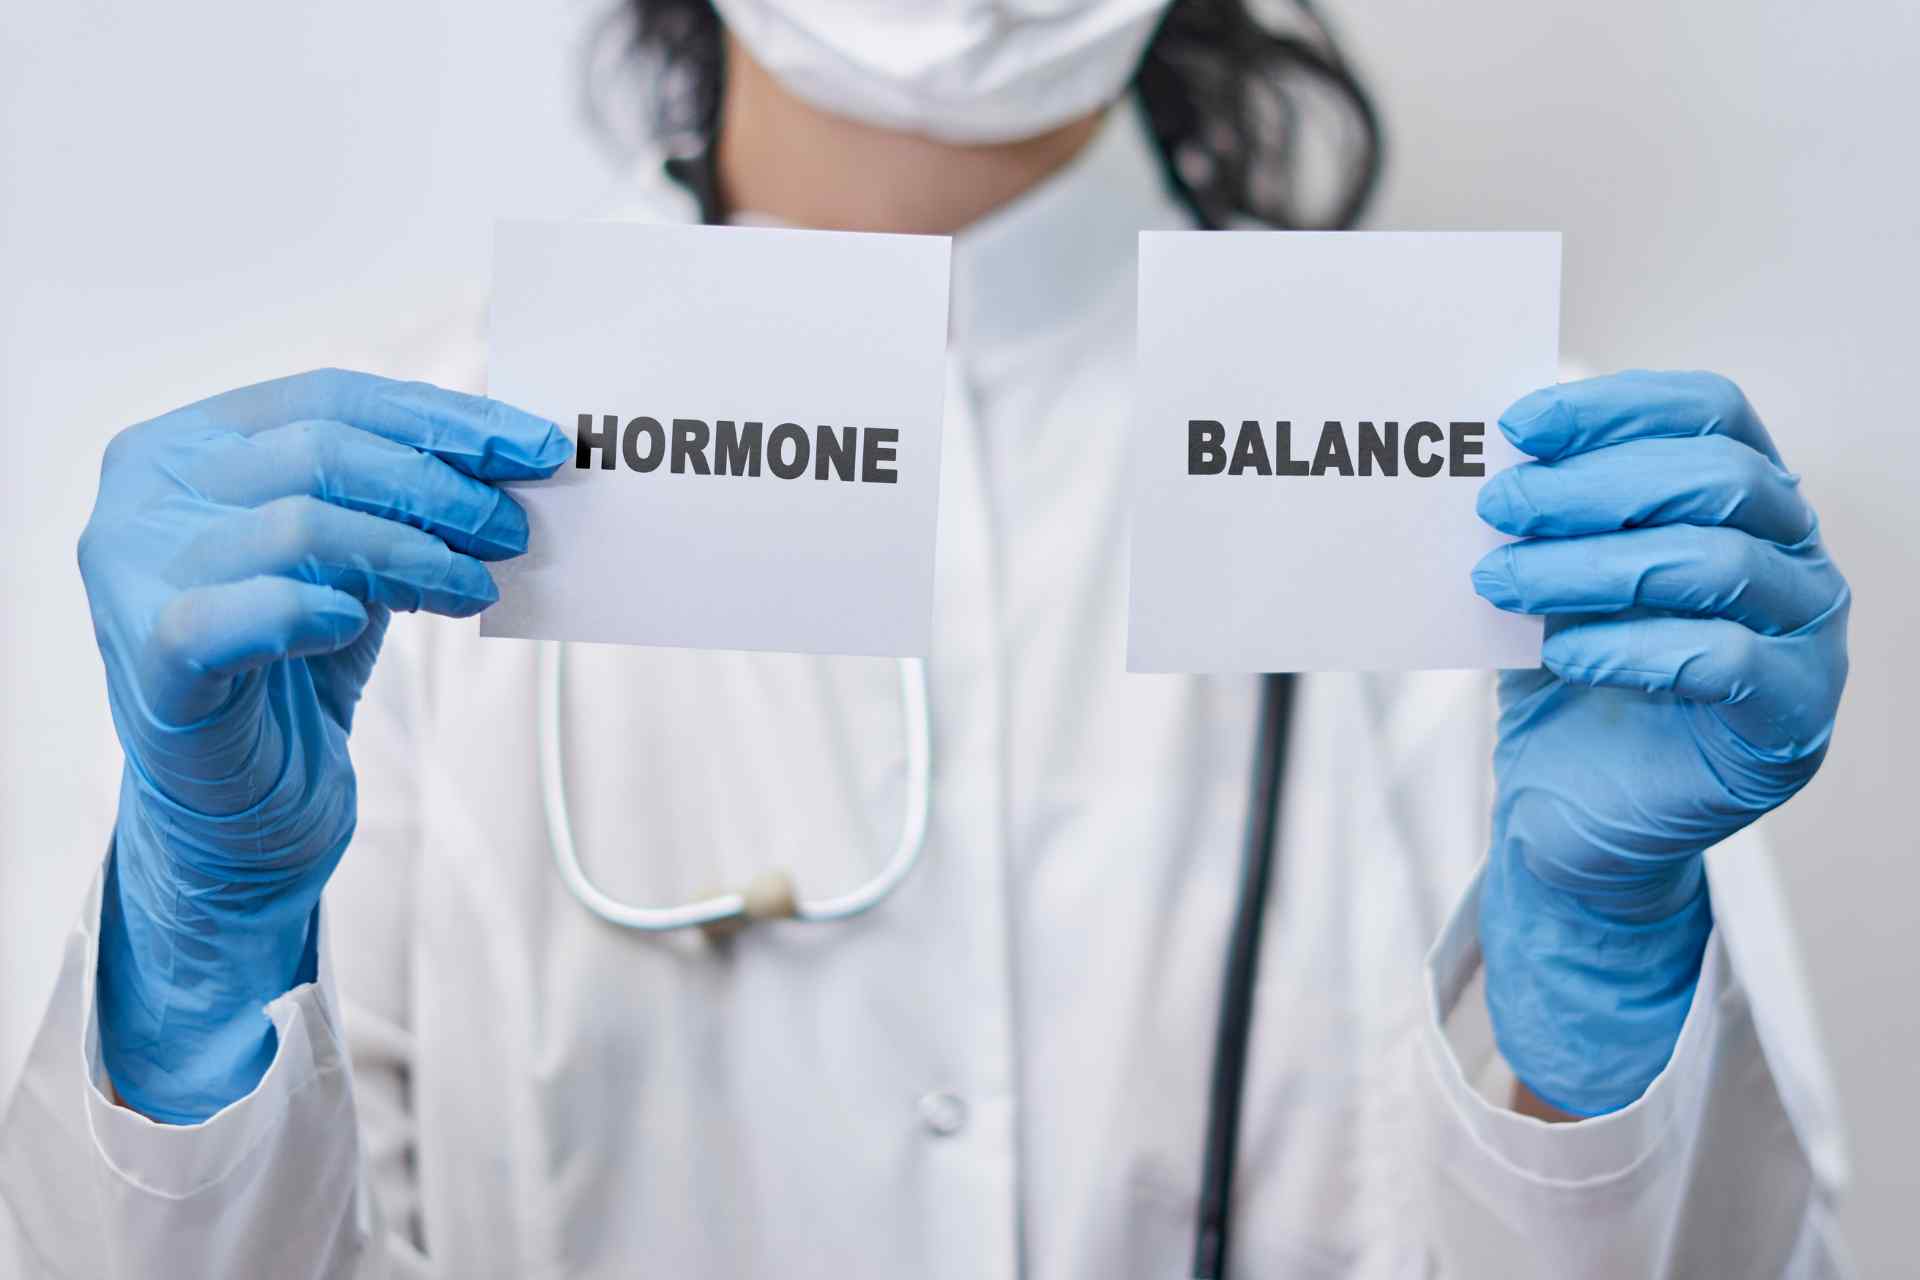 Questions About Bio-Identical Hormone Therapy